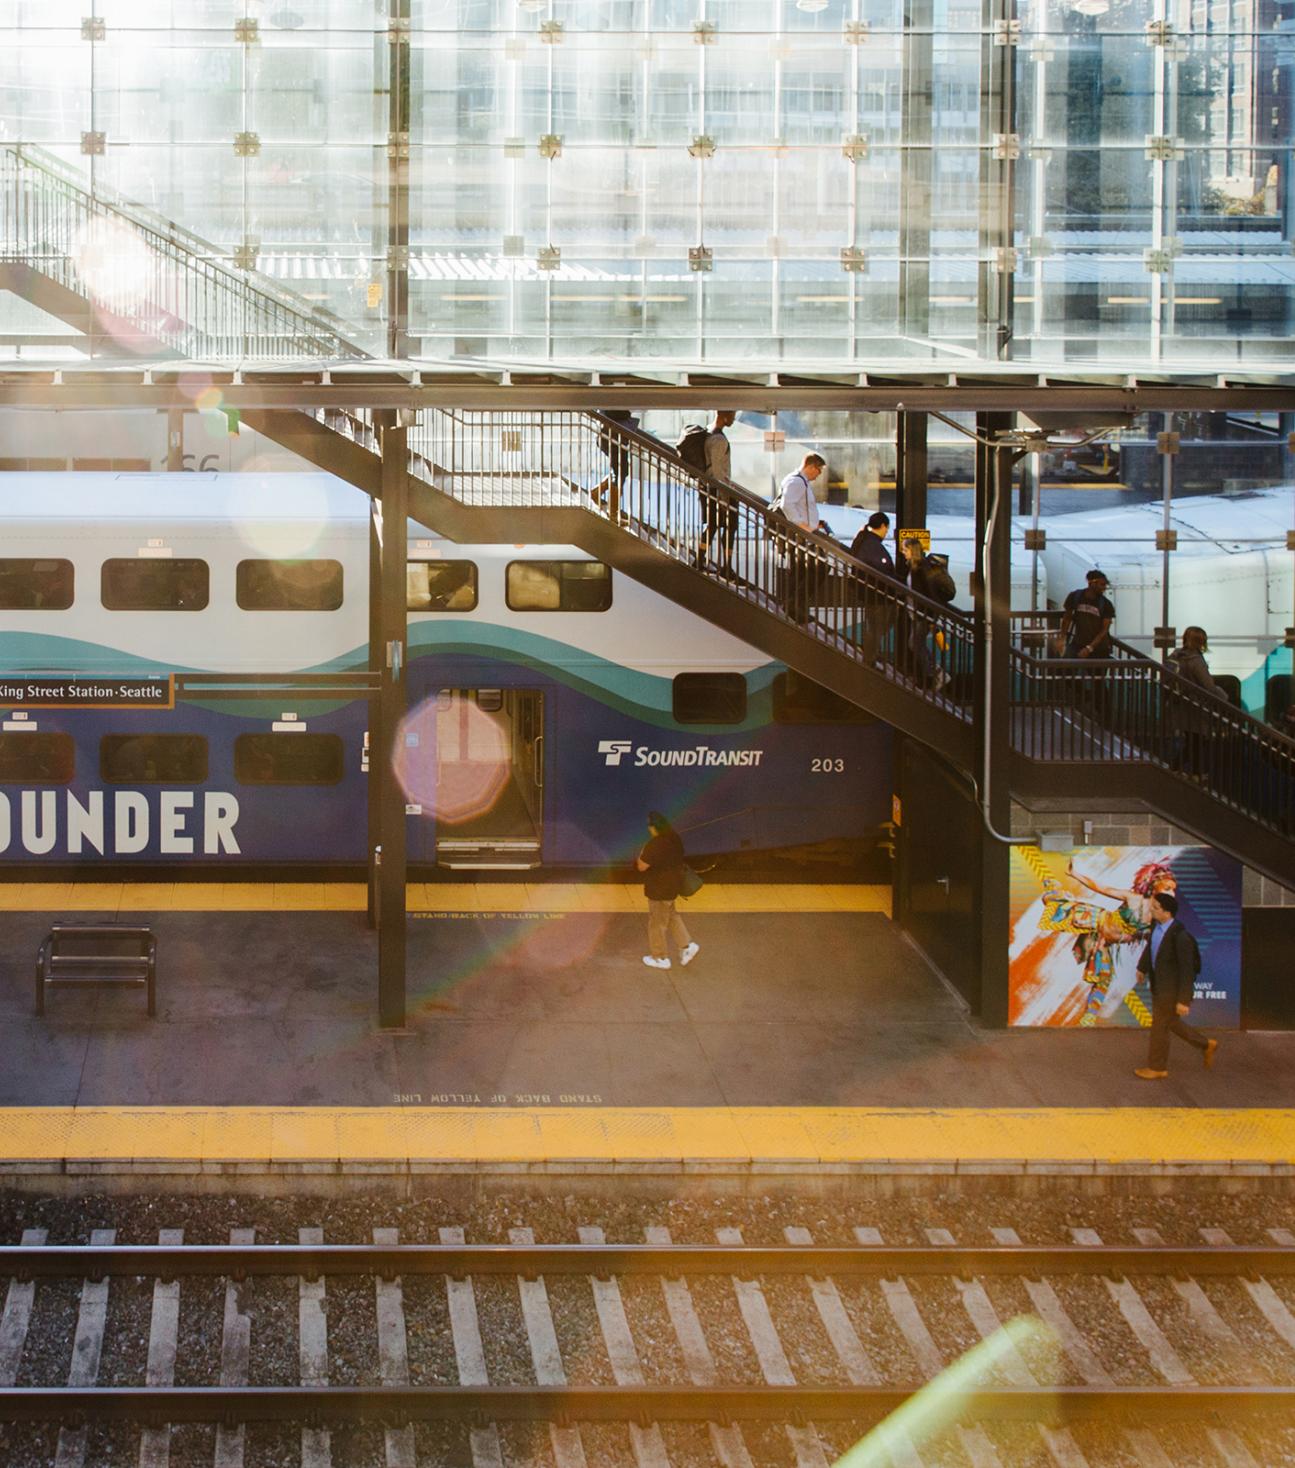 A Sounder Train at King Street Station with passengers walking on the platform.